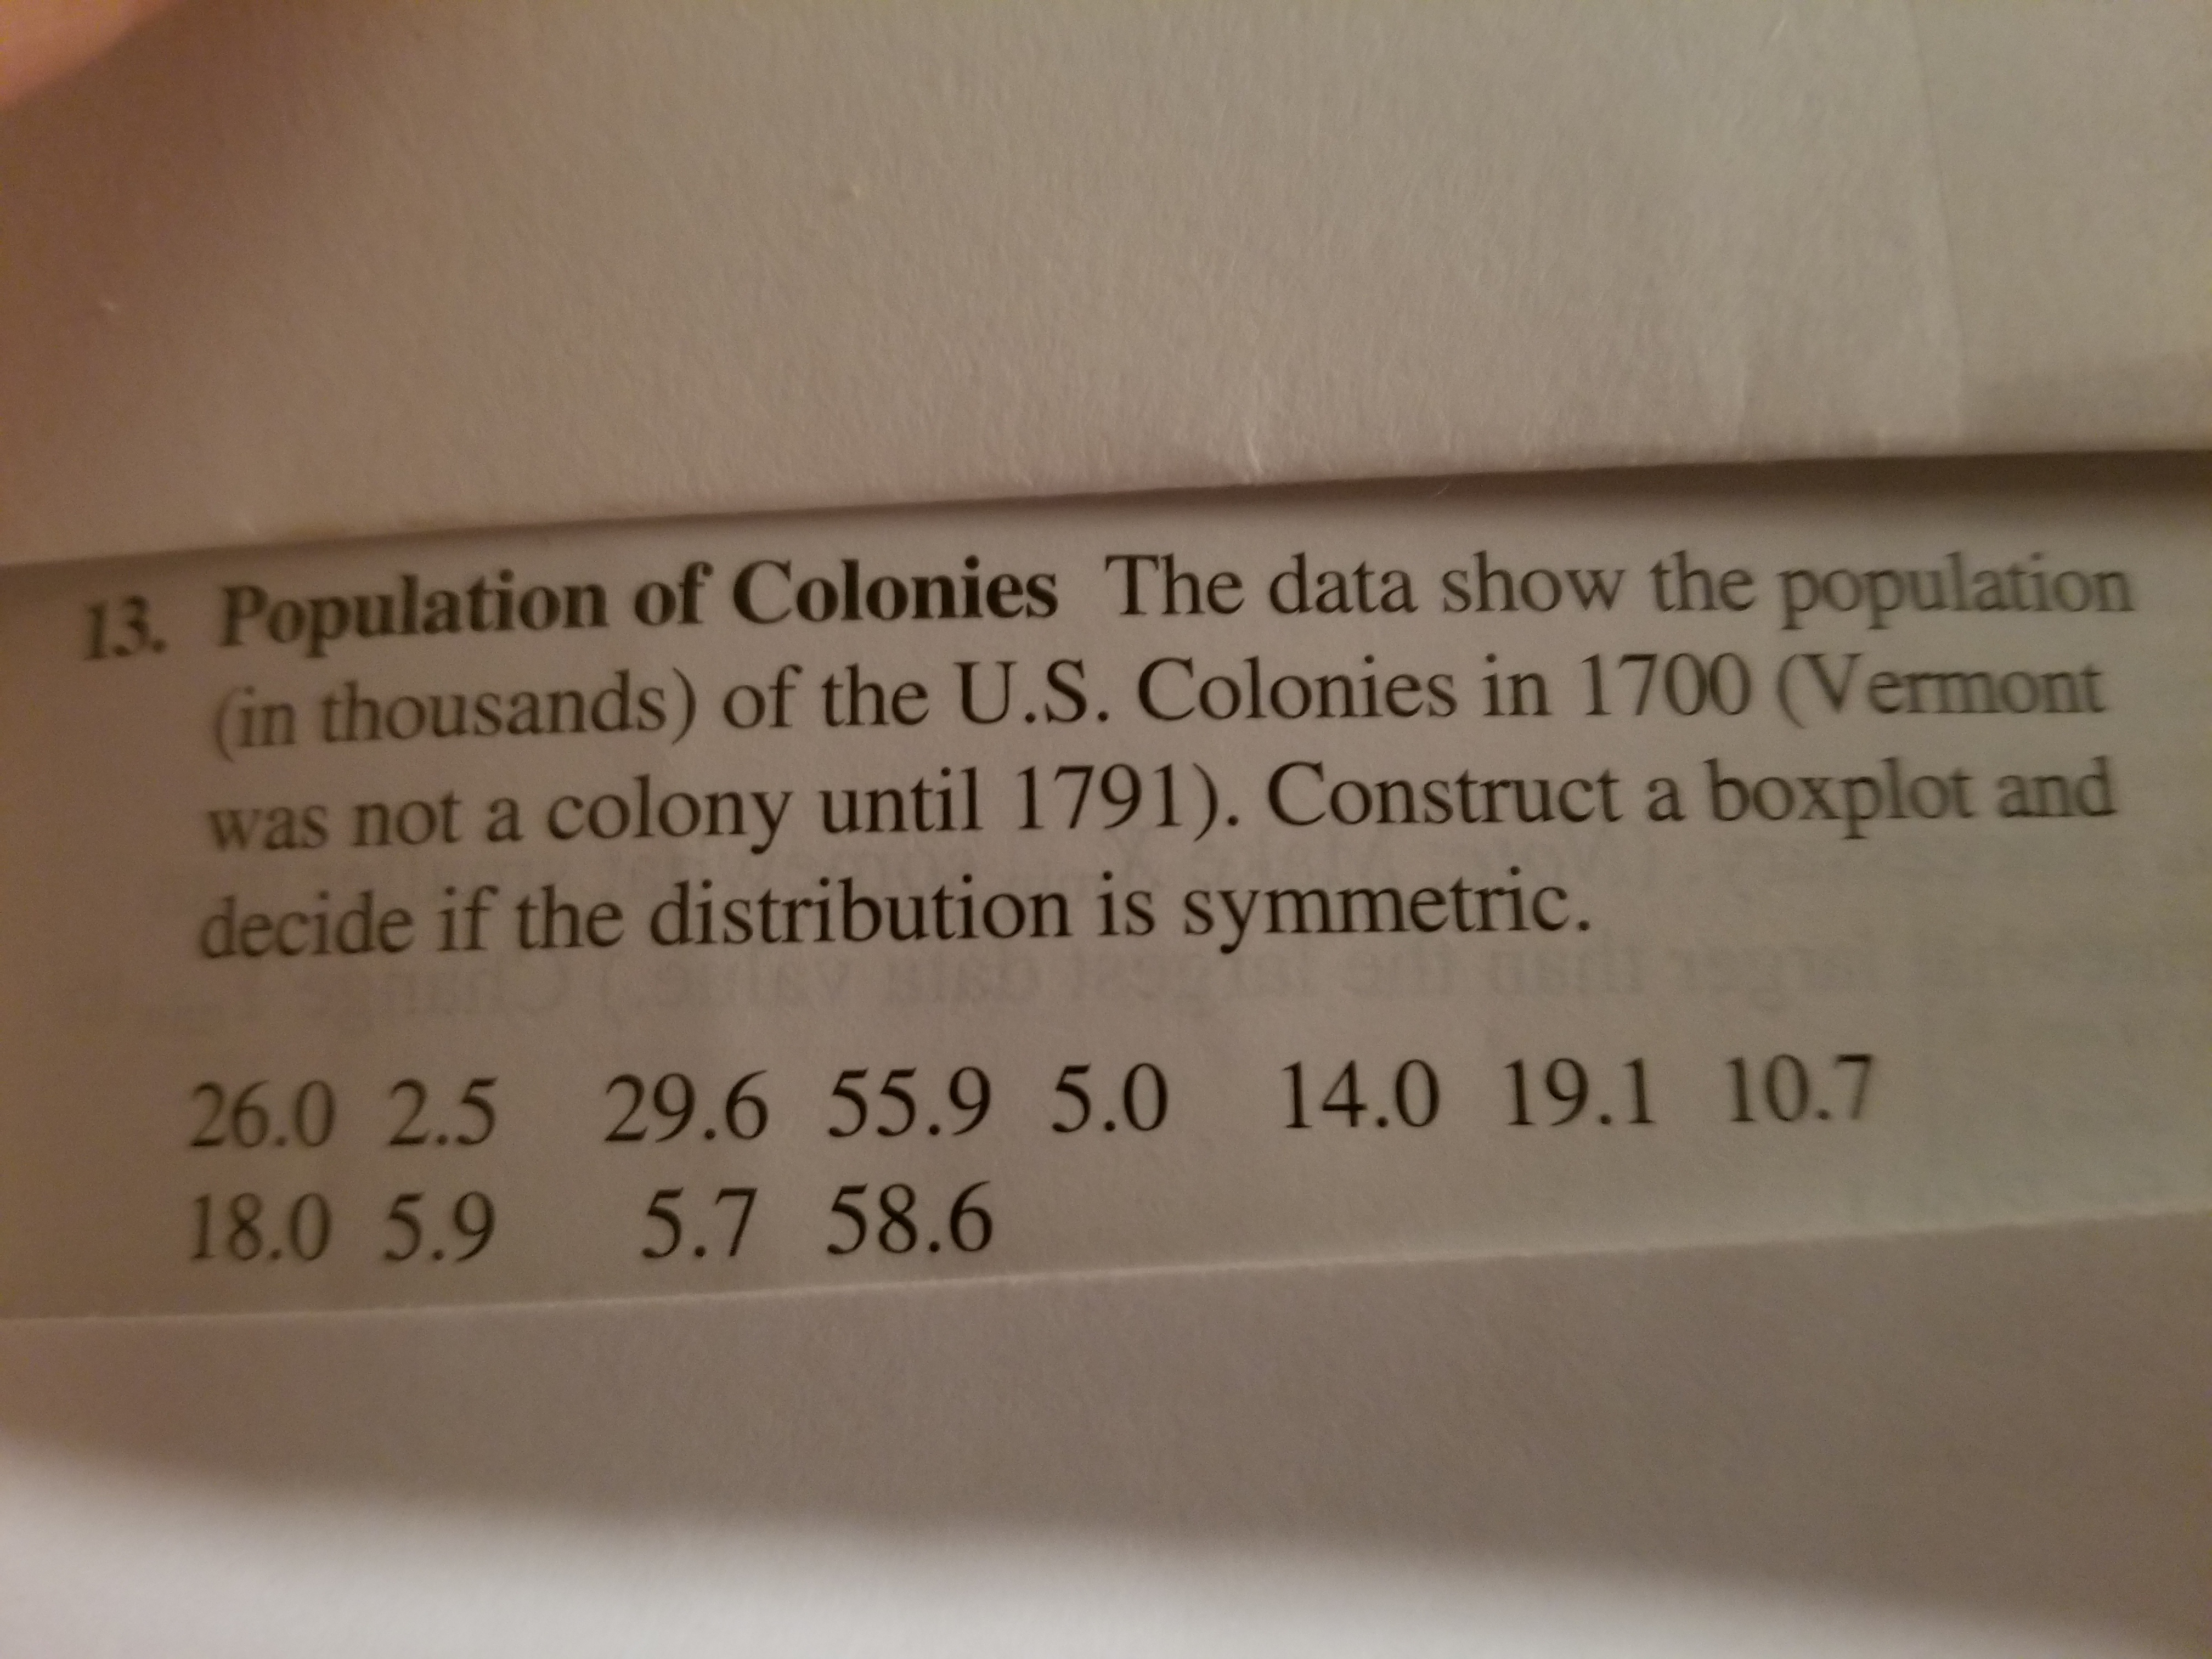 13. Population of Colonies The data show the population
(in thousands) of the U.S. Colonies in 1700 (Vermont
was not a colony until 1791). Construct a boxplot and
decide if the distribution is symmetric.
26.0 2.5 29.6 55.9 5.0 14.0 19.1 10.7
18.0 5.9 5.7 58.6
